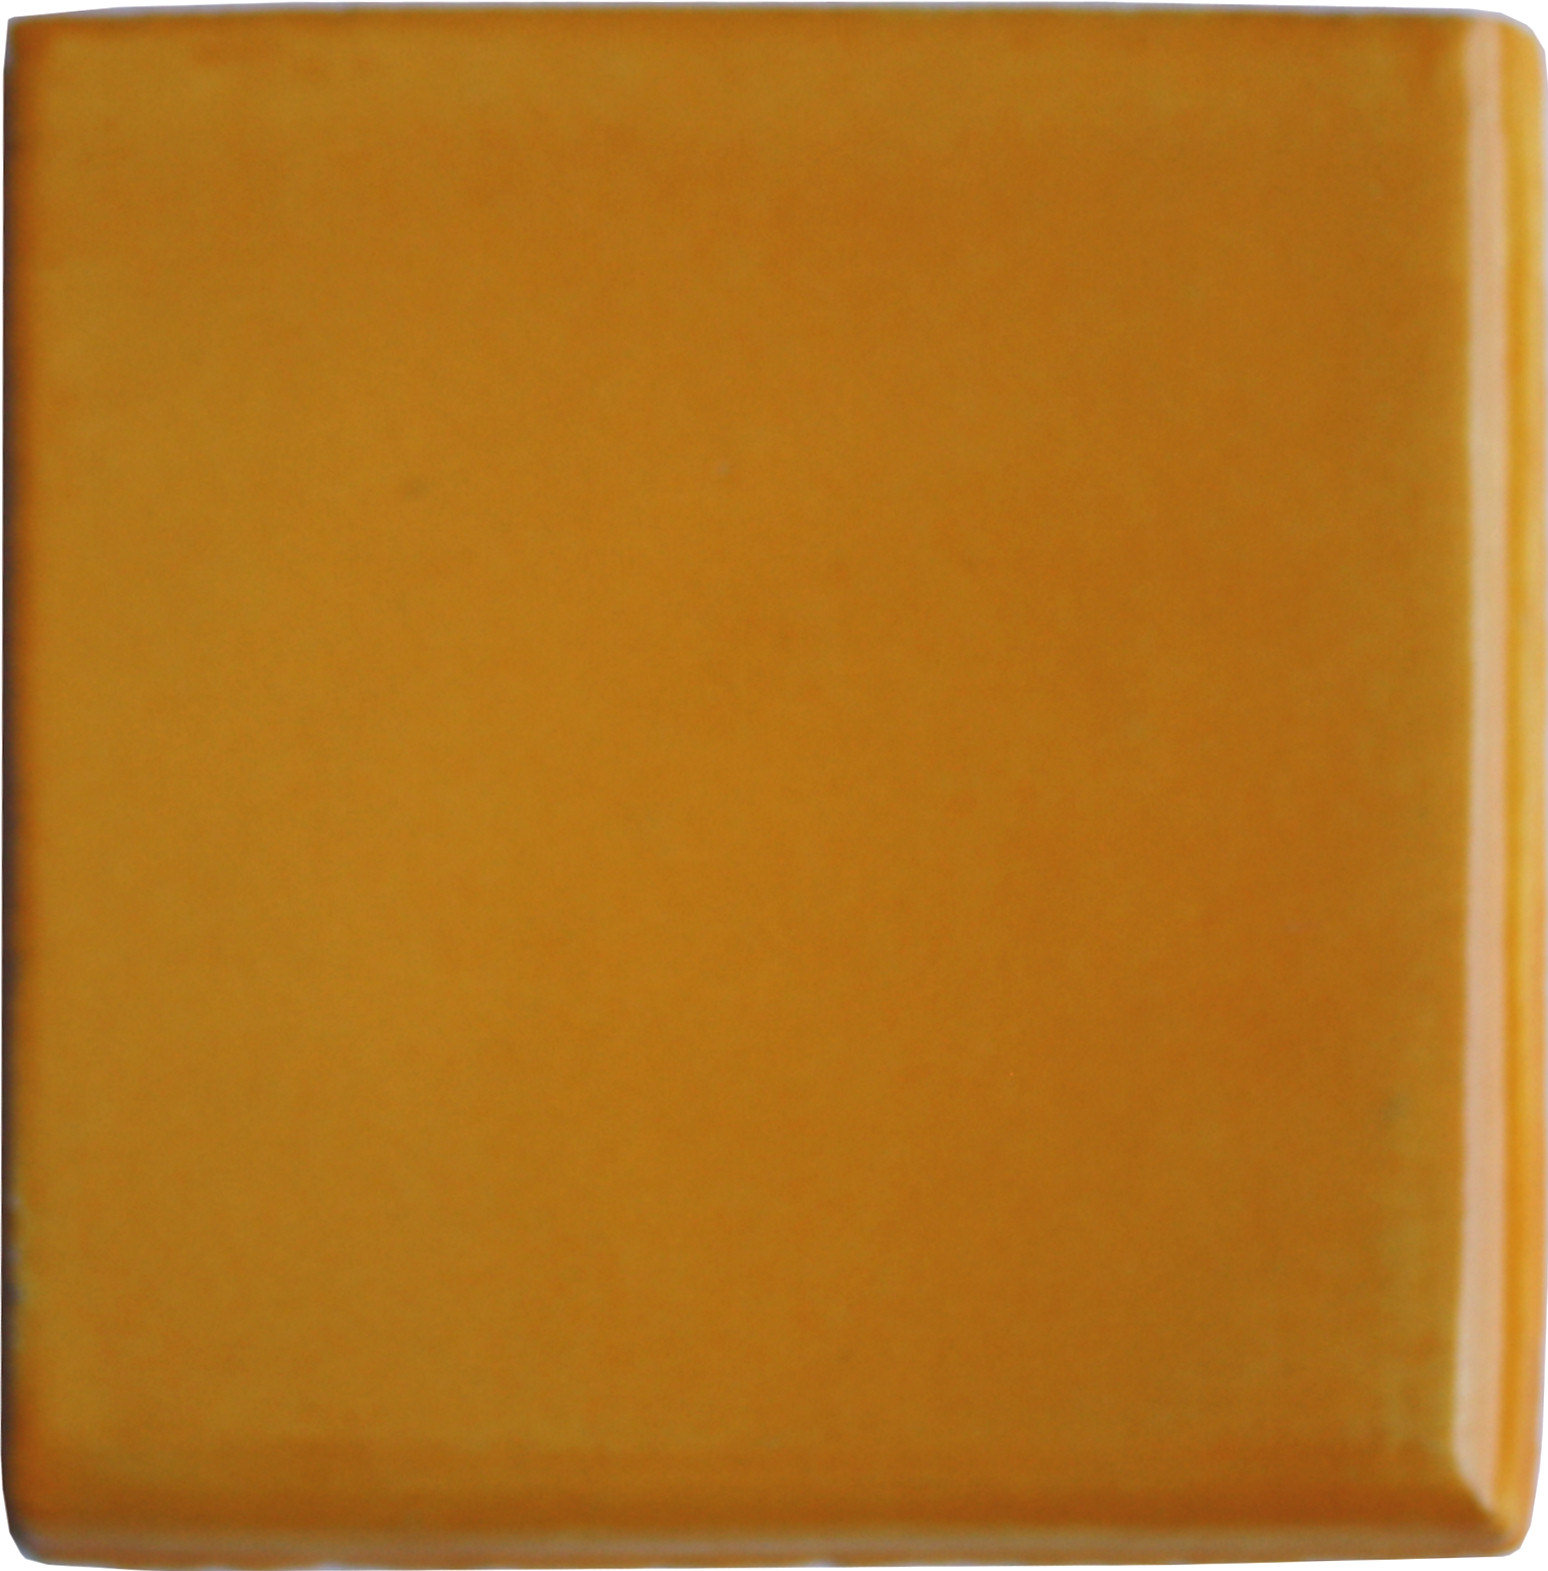 TalaMex Yellow Double Bullnose